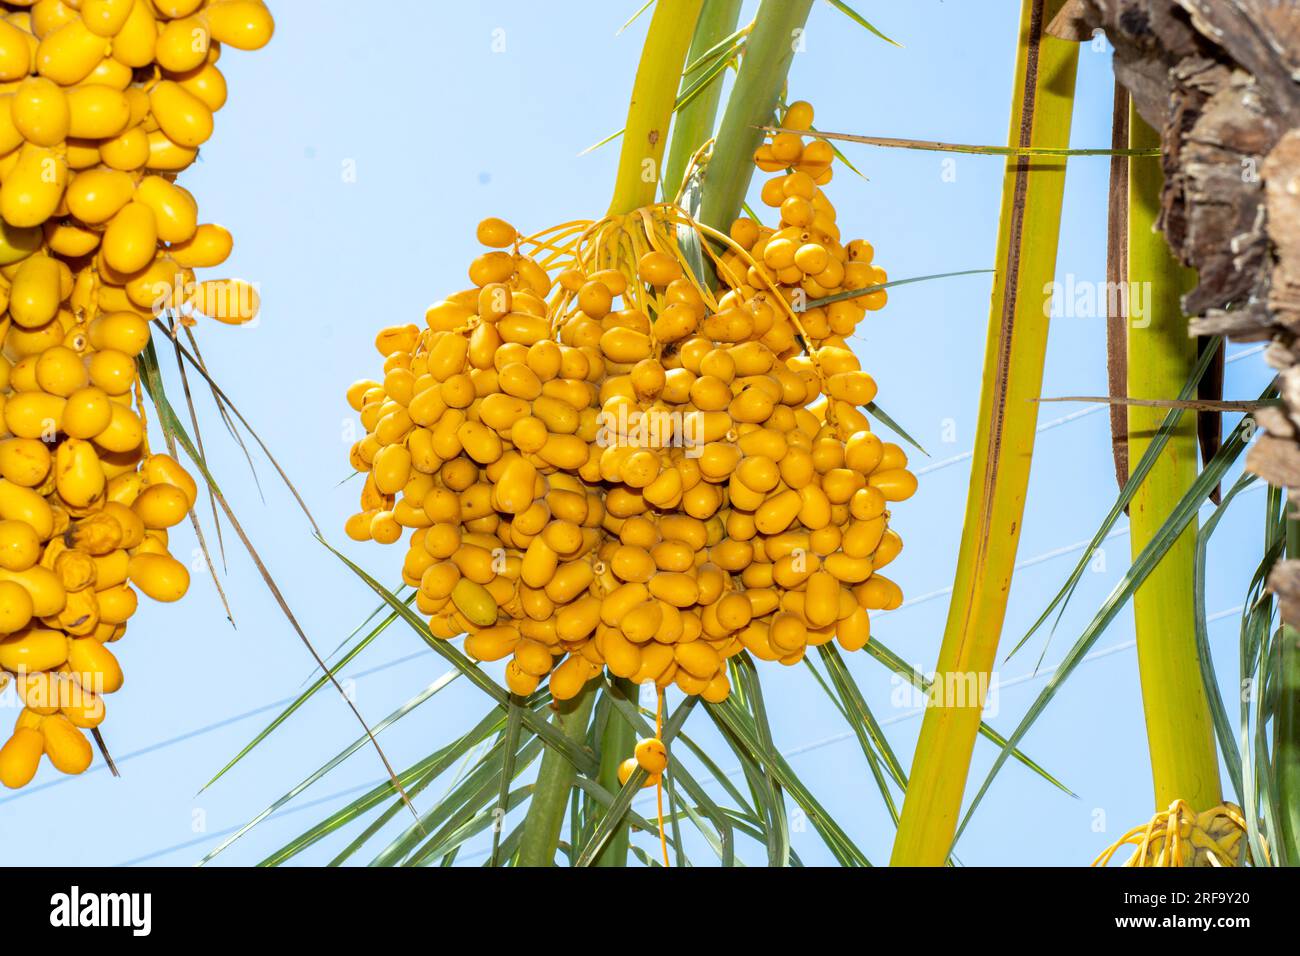 Yellow date fruit bunches hanging on a tree Stock Photo